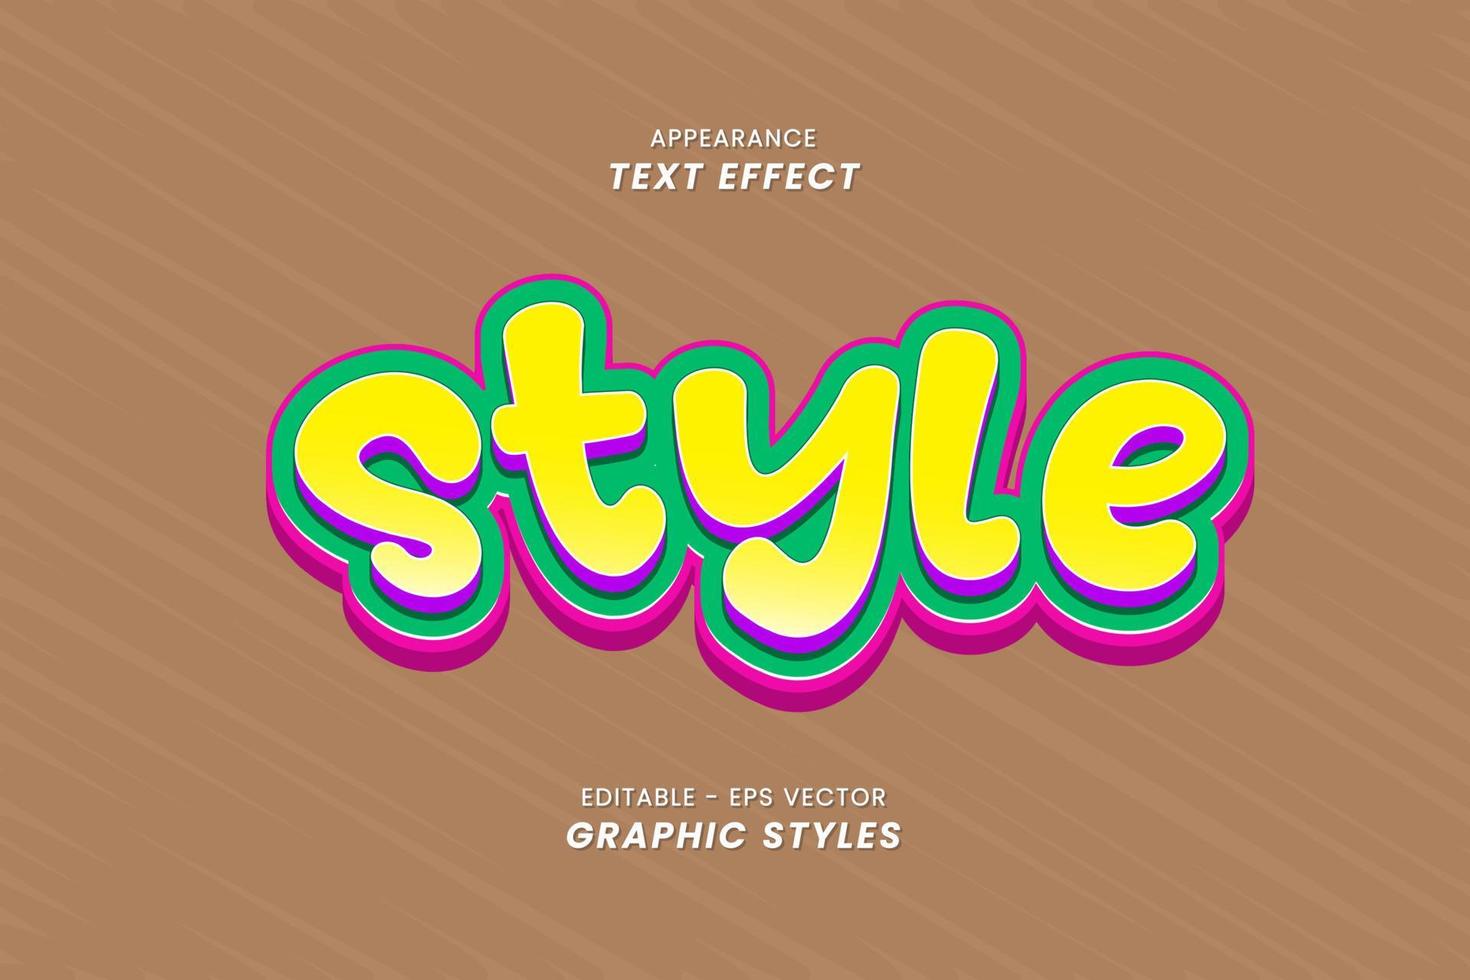 Editable Text Effect - Word Style with Modern Theme. vector